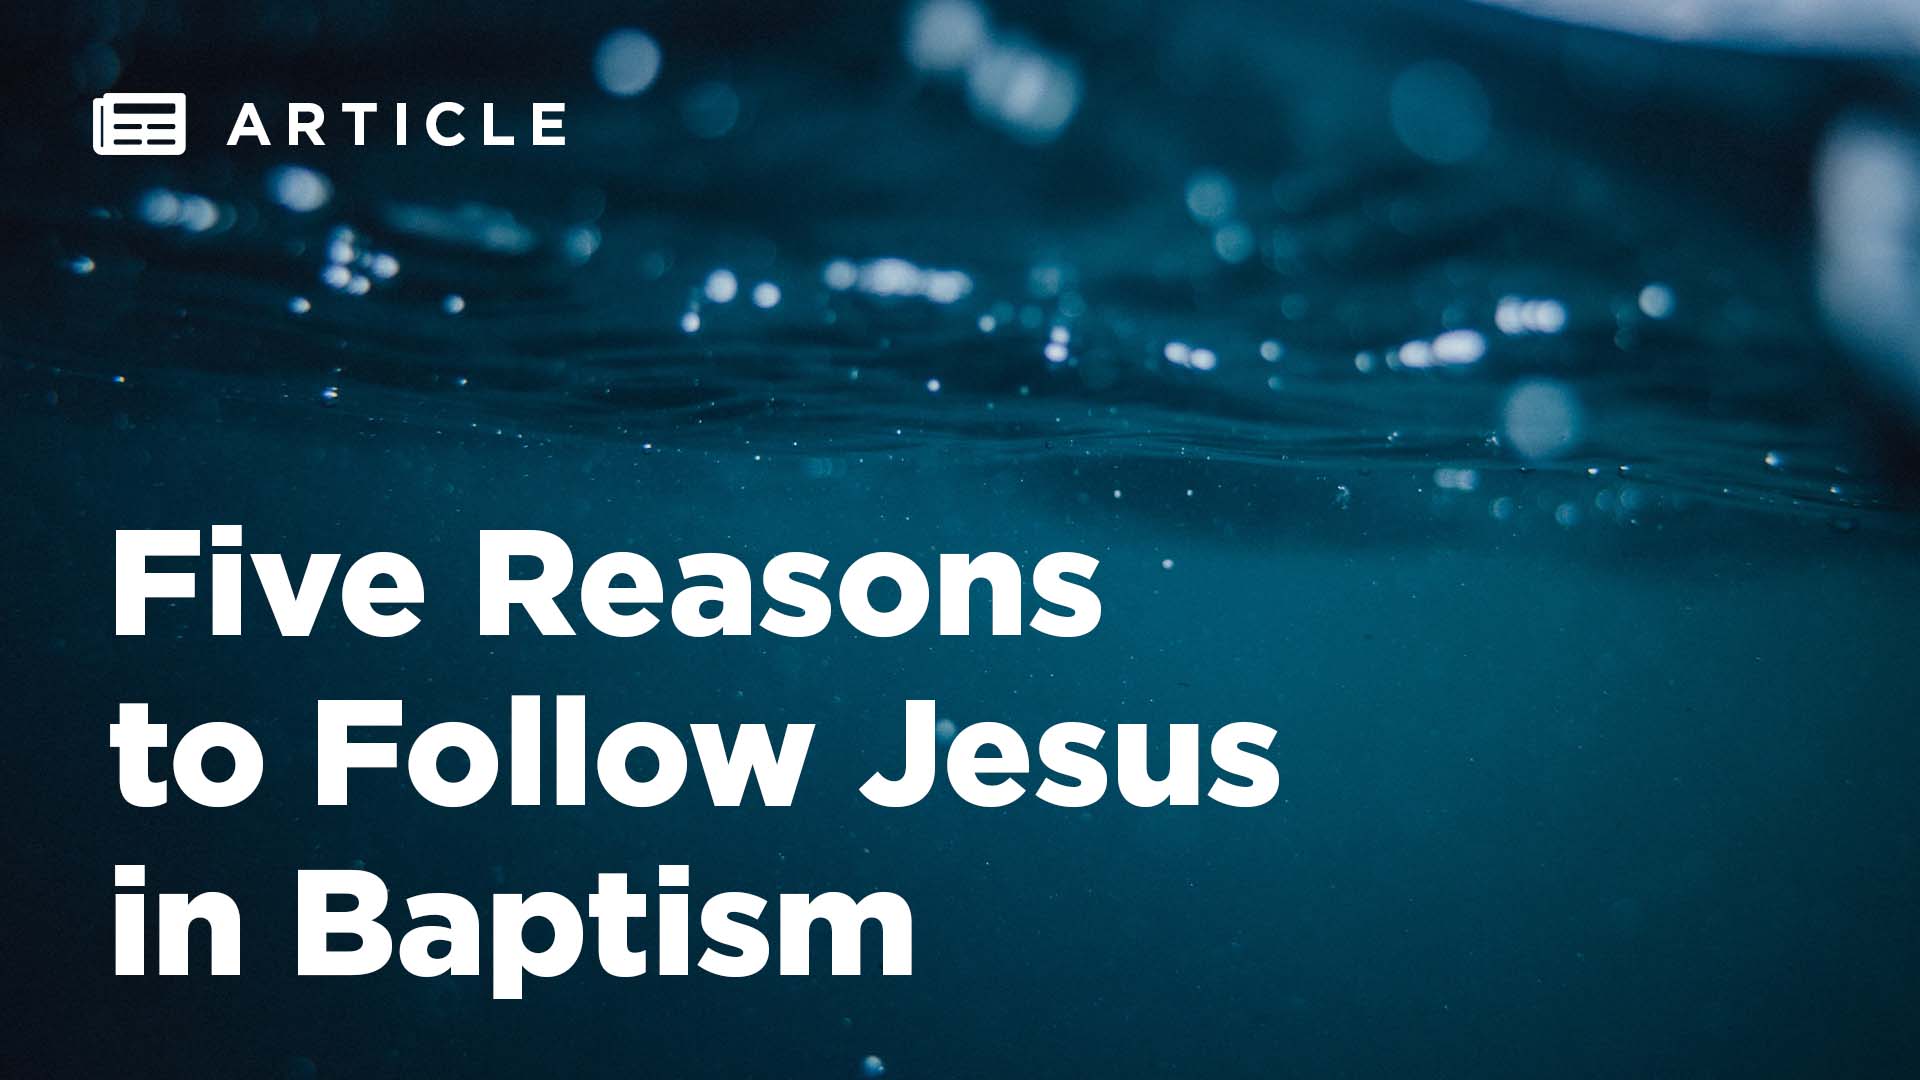 Article | Five Reasons to Follow Jesus in Baptism